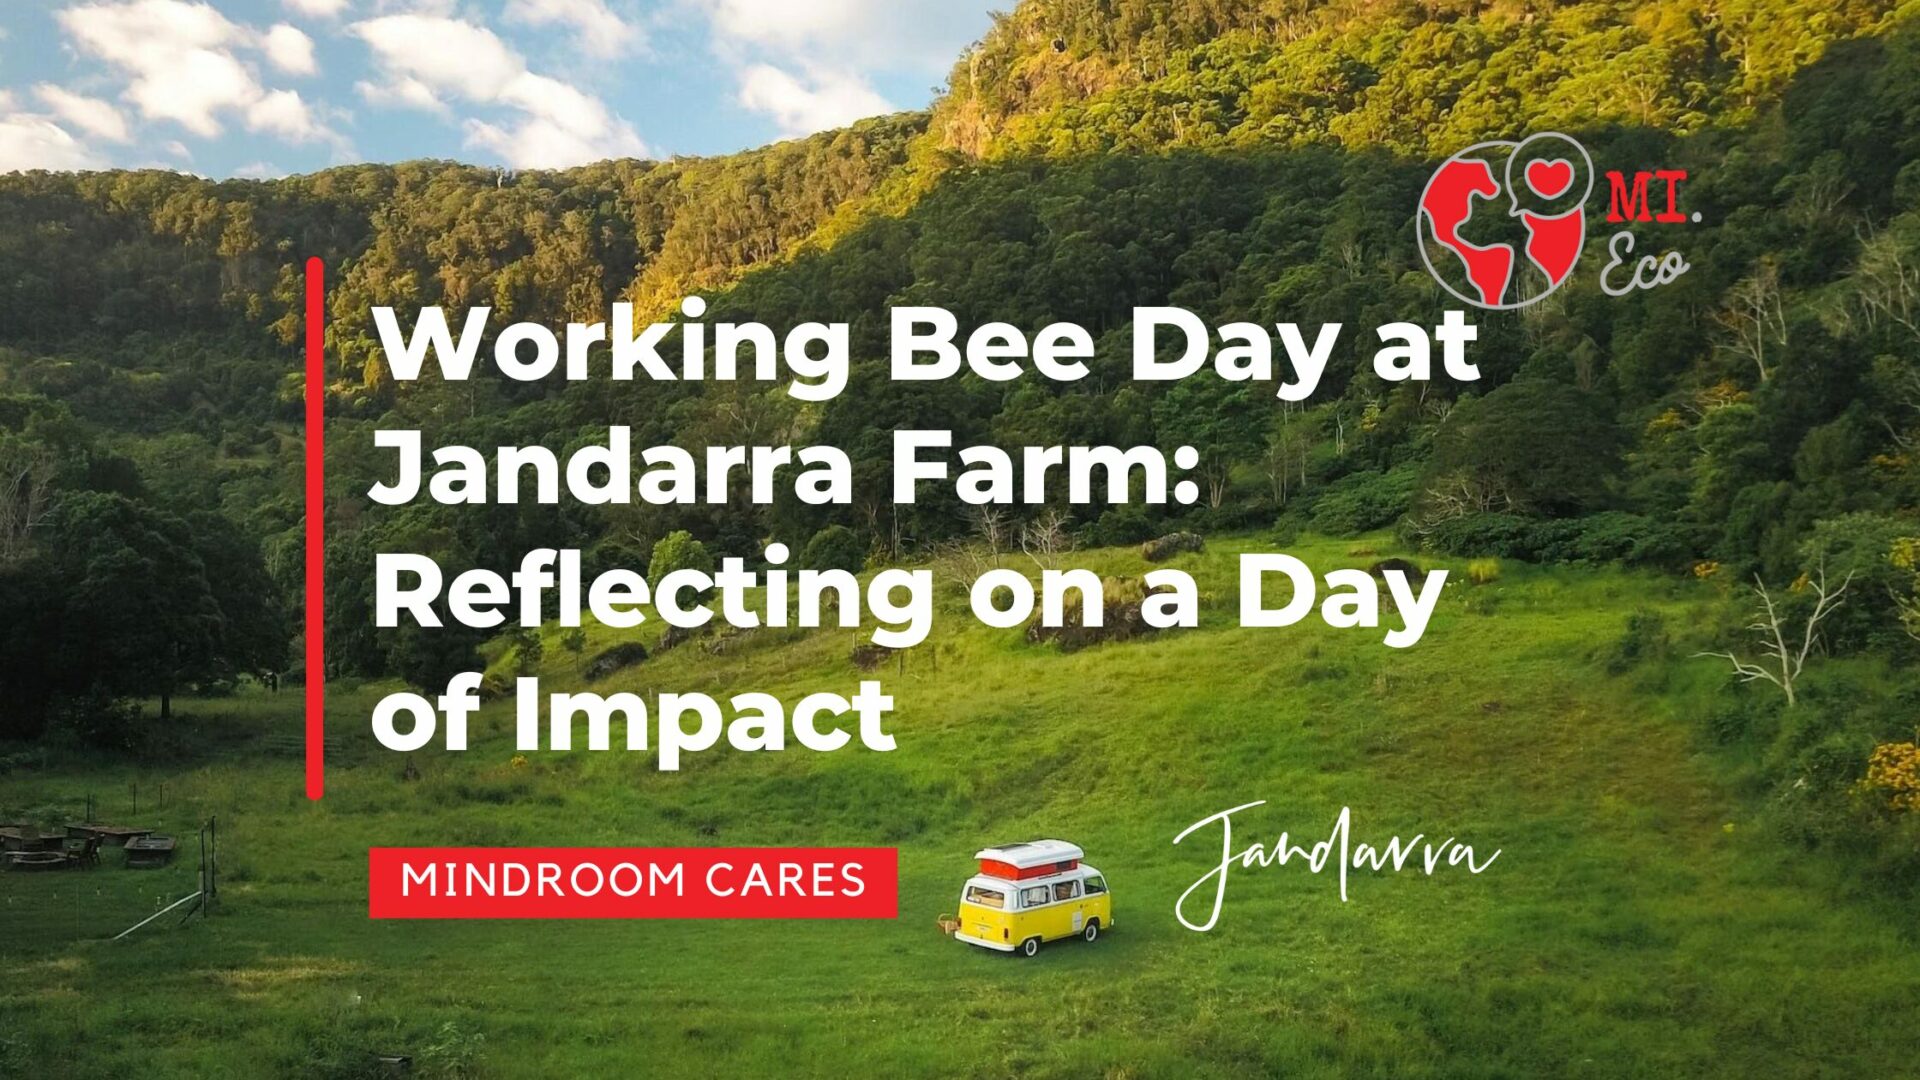 Working Bee Day at Jandarra Farm: Reflecting on a Day of Impact